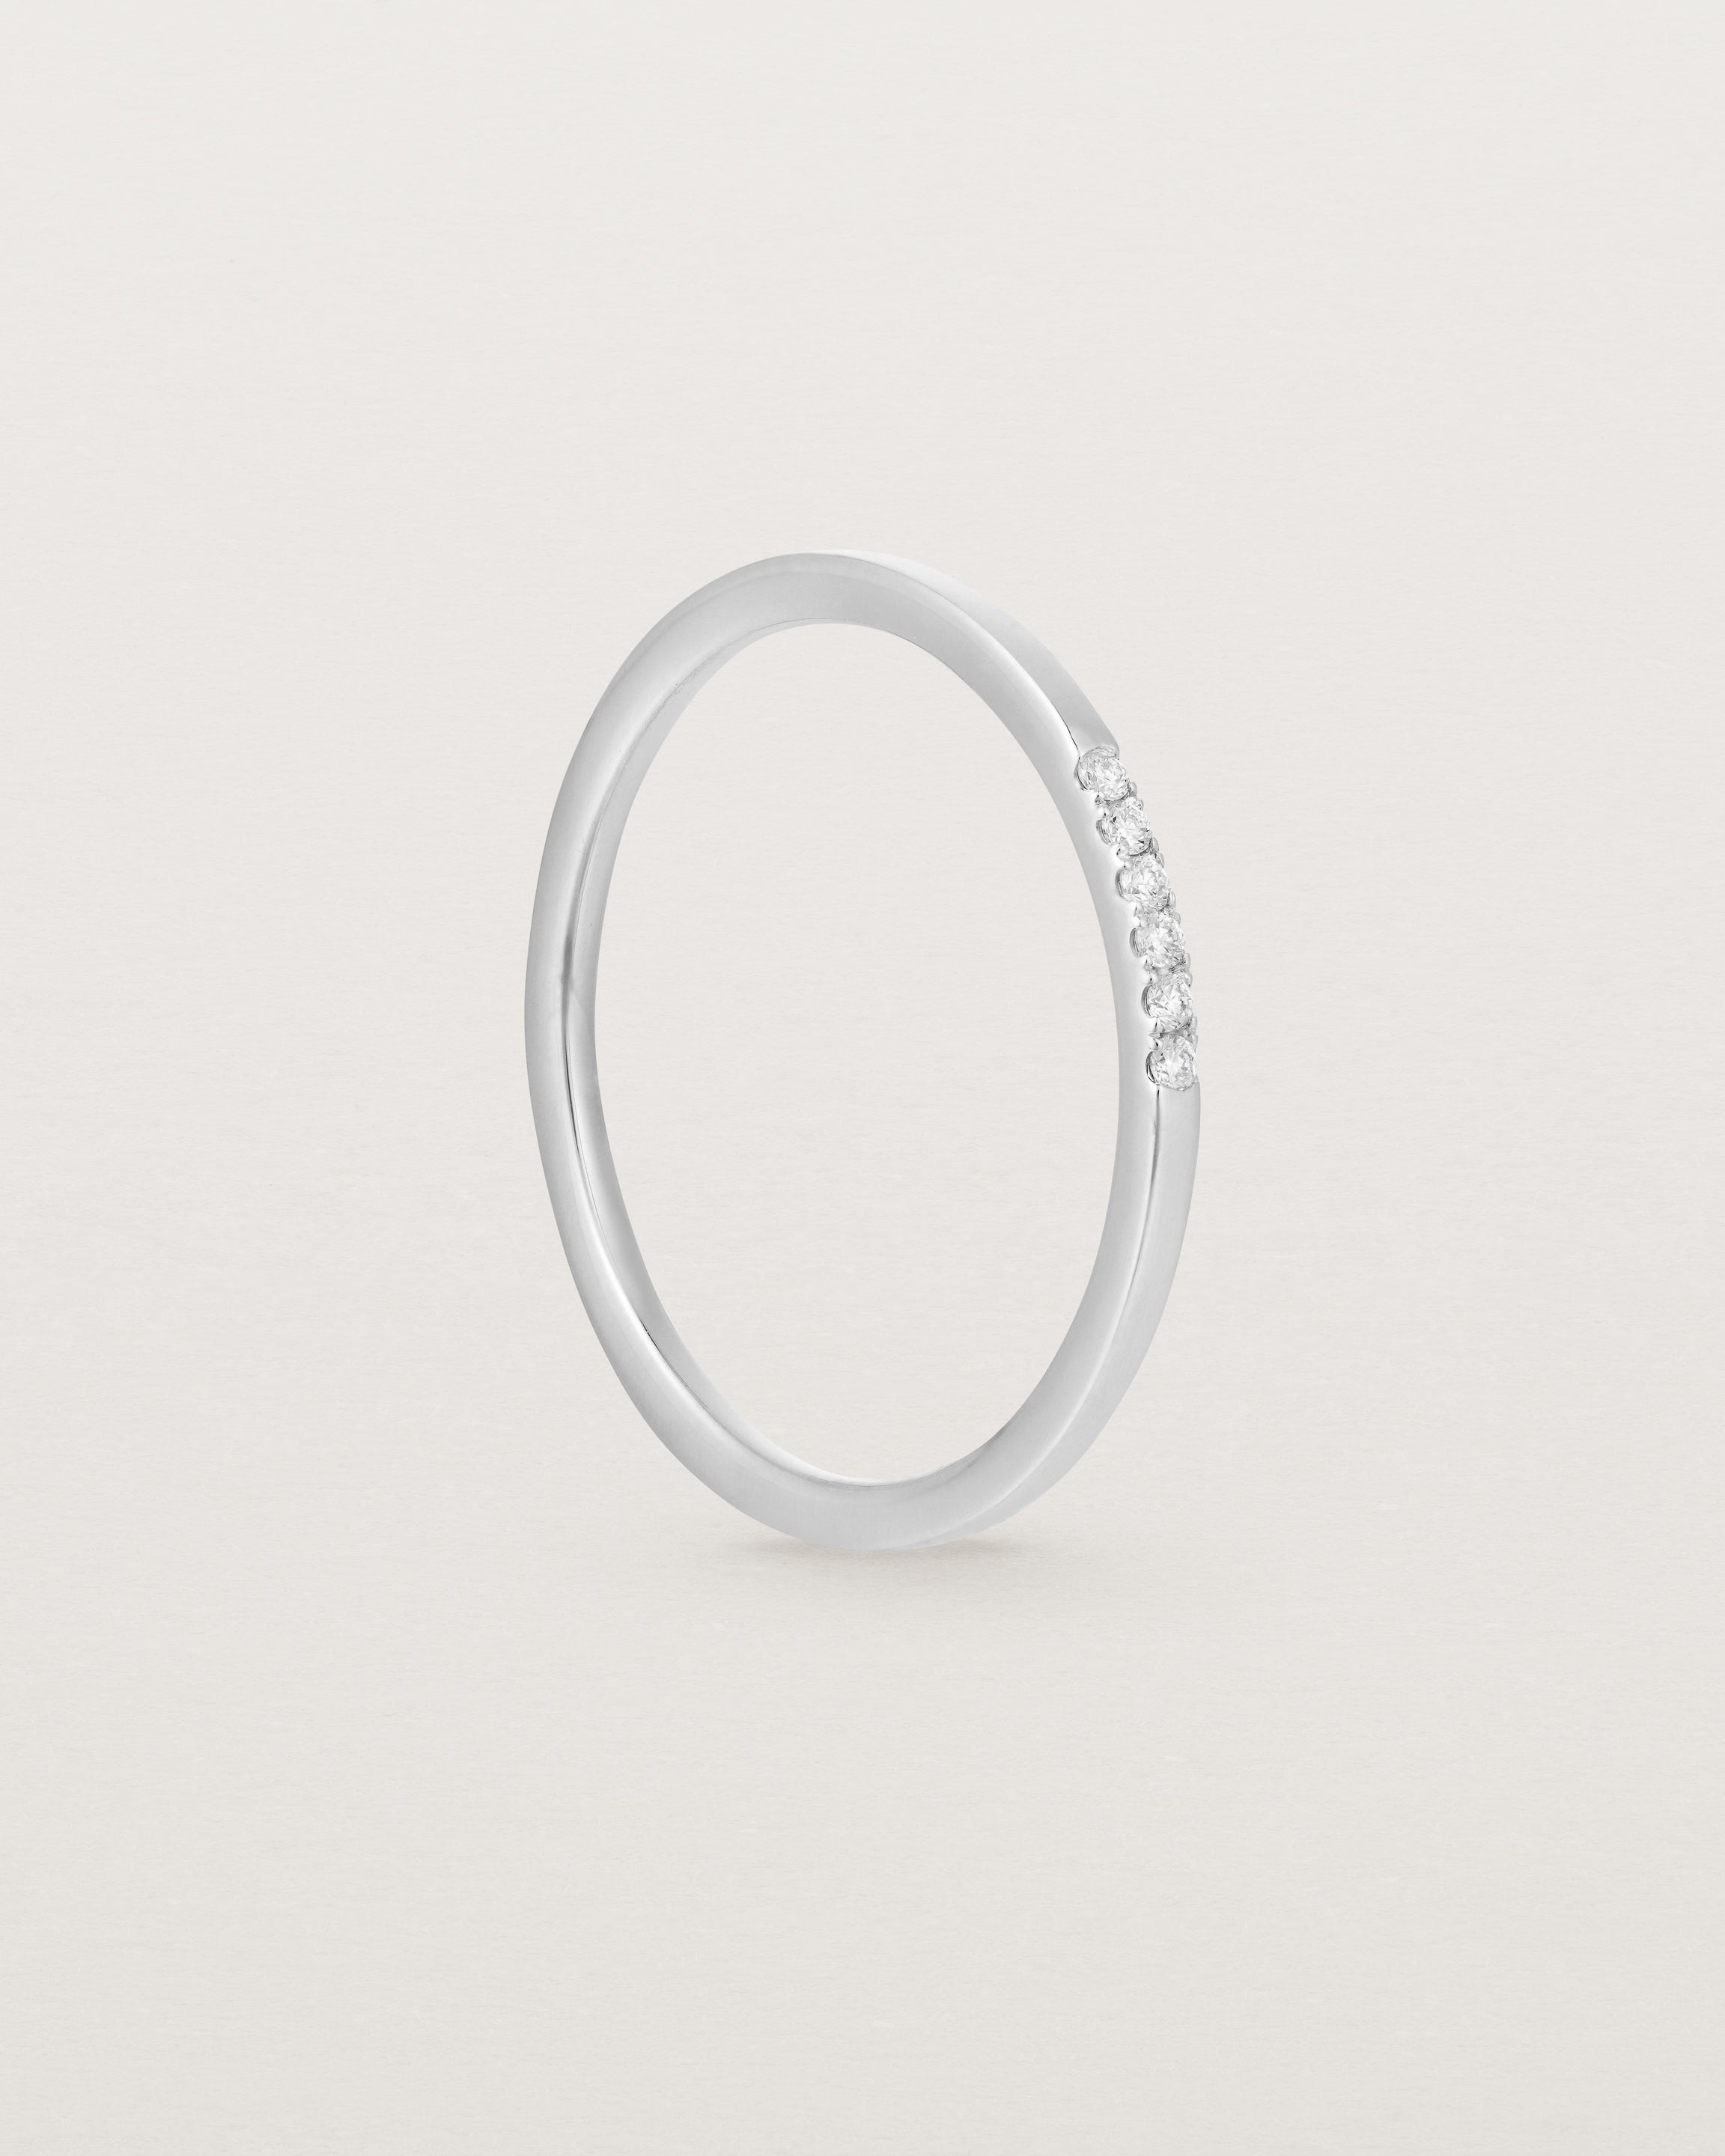 Standing view of the Six Stone Queenie Ring | Diamonds in White Gold.